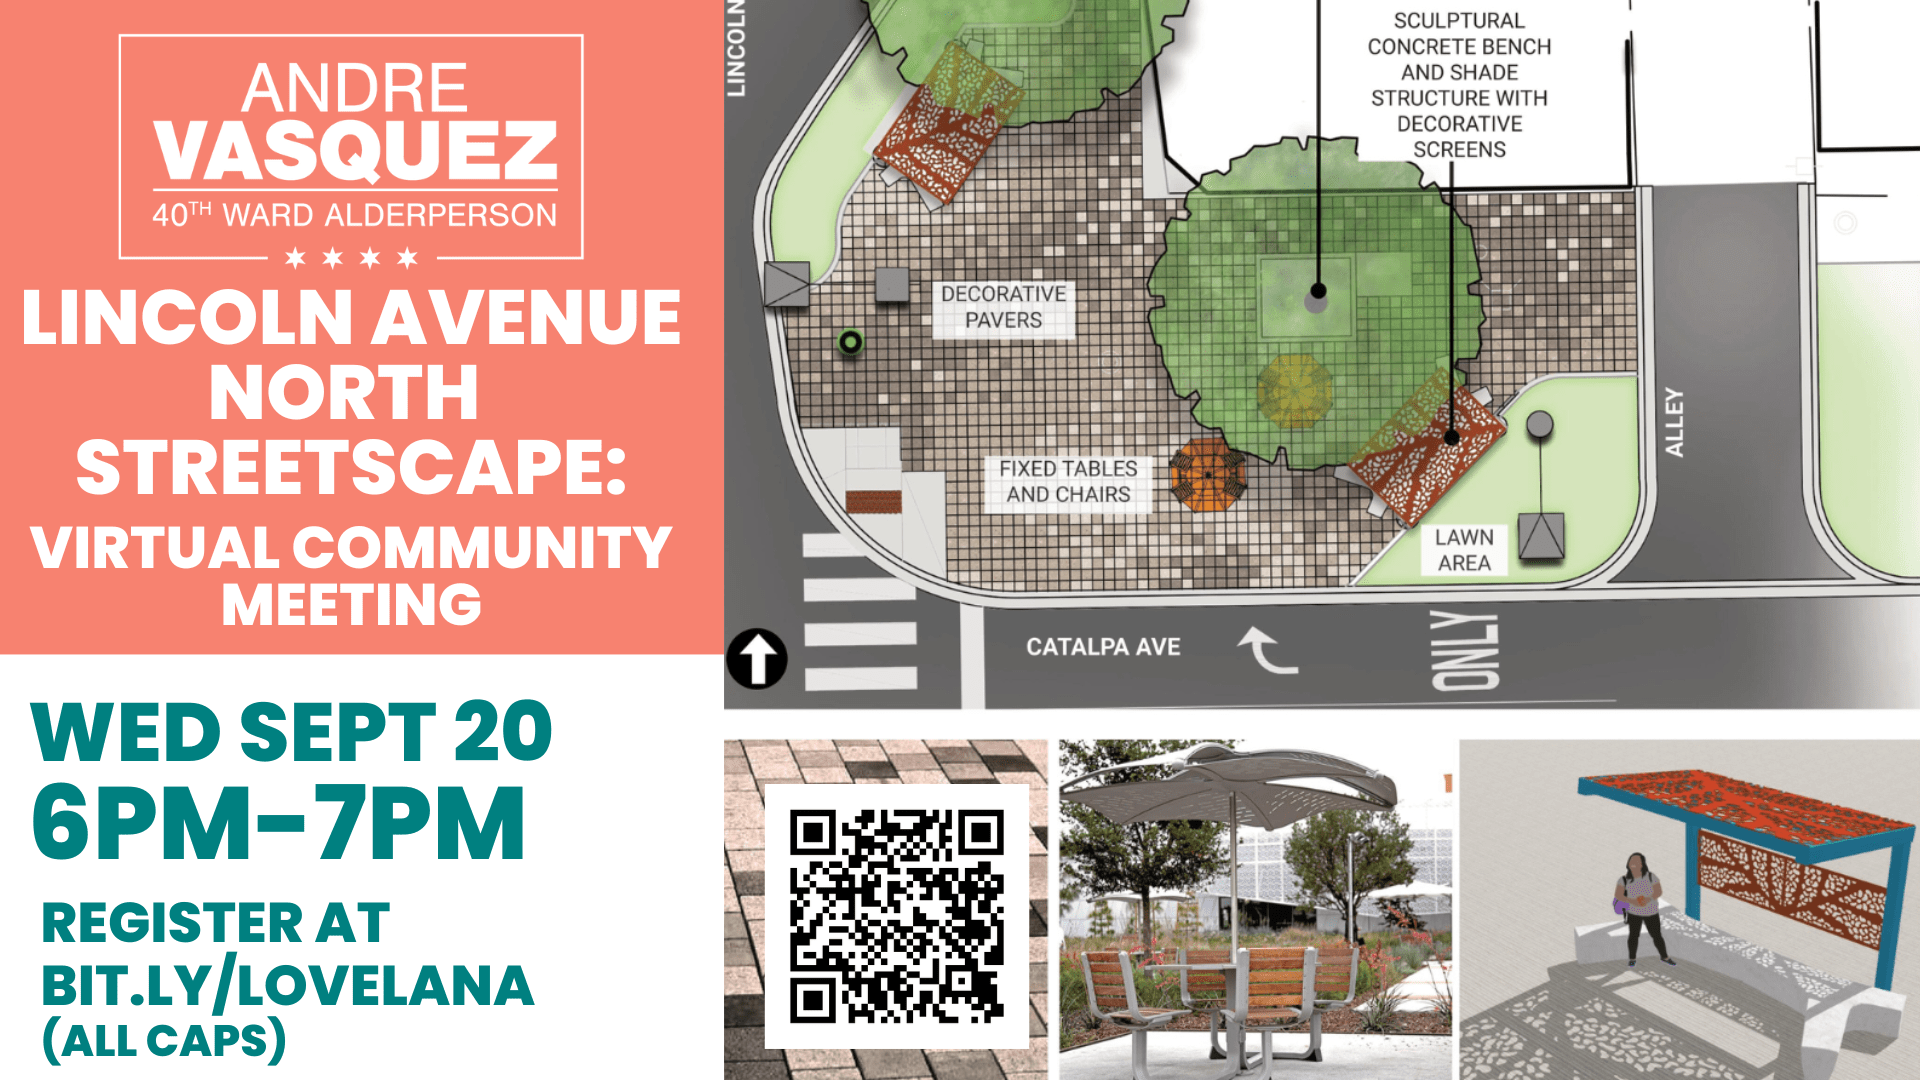 Lincoln Ave North Streetscape virtual community meeting announcement